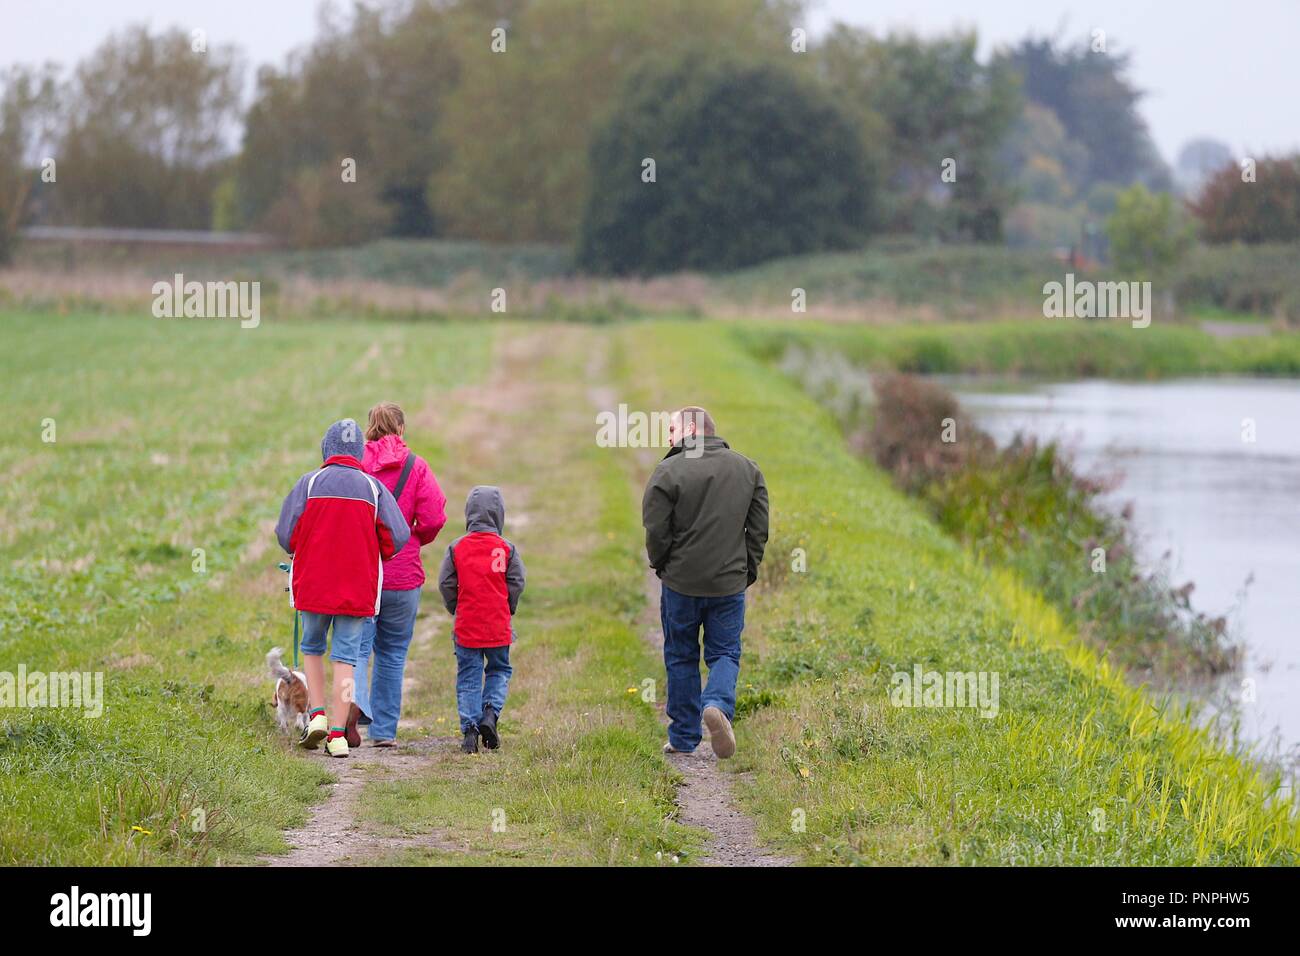 Ashford, Kent, UK. 22th Sep, 2018. UK Weather: The unsettled weather continues as it starts to pour down with rain in the village of Hamstreet just outside Ashford. A family in bright red jackets walk a dog in the pouring rain along a path beside a rural sewer ditch canal. © Paul Lawrenson 2018, Photo Credit: Paul Lawrenson / Alamy Live News Stock Photo